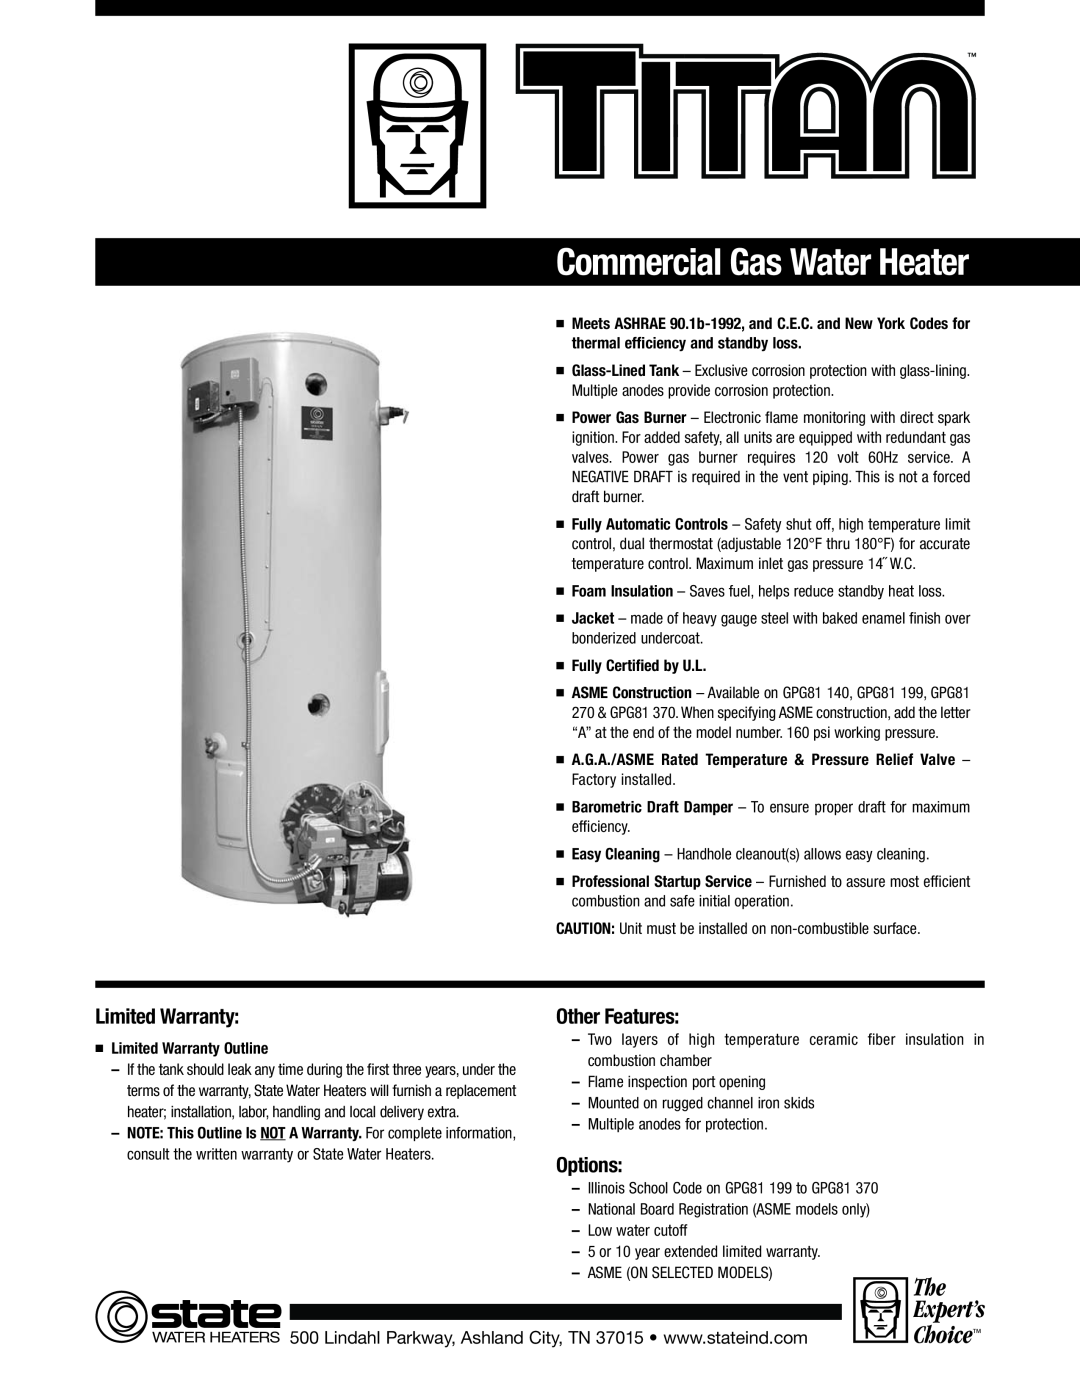 State Industries STGPG/0303 warranty Commercial Gas Water Heater, The Expert’s, Choice, Limited Warranty, Other Features 